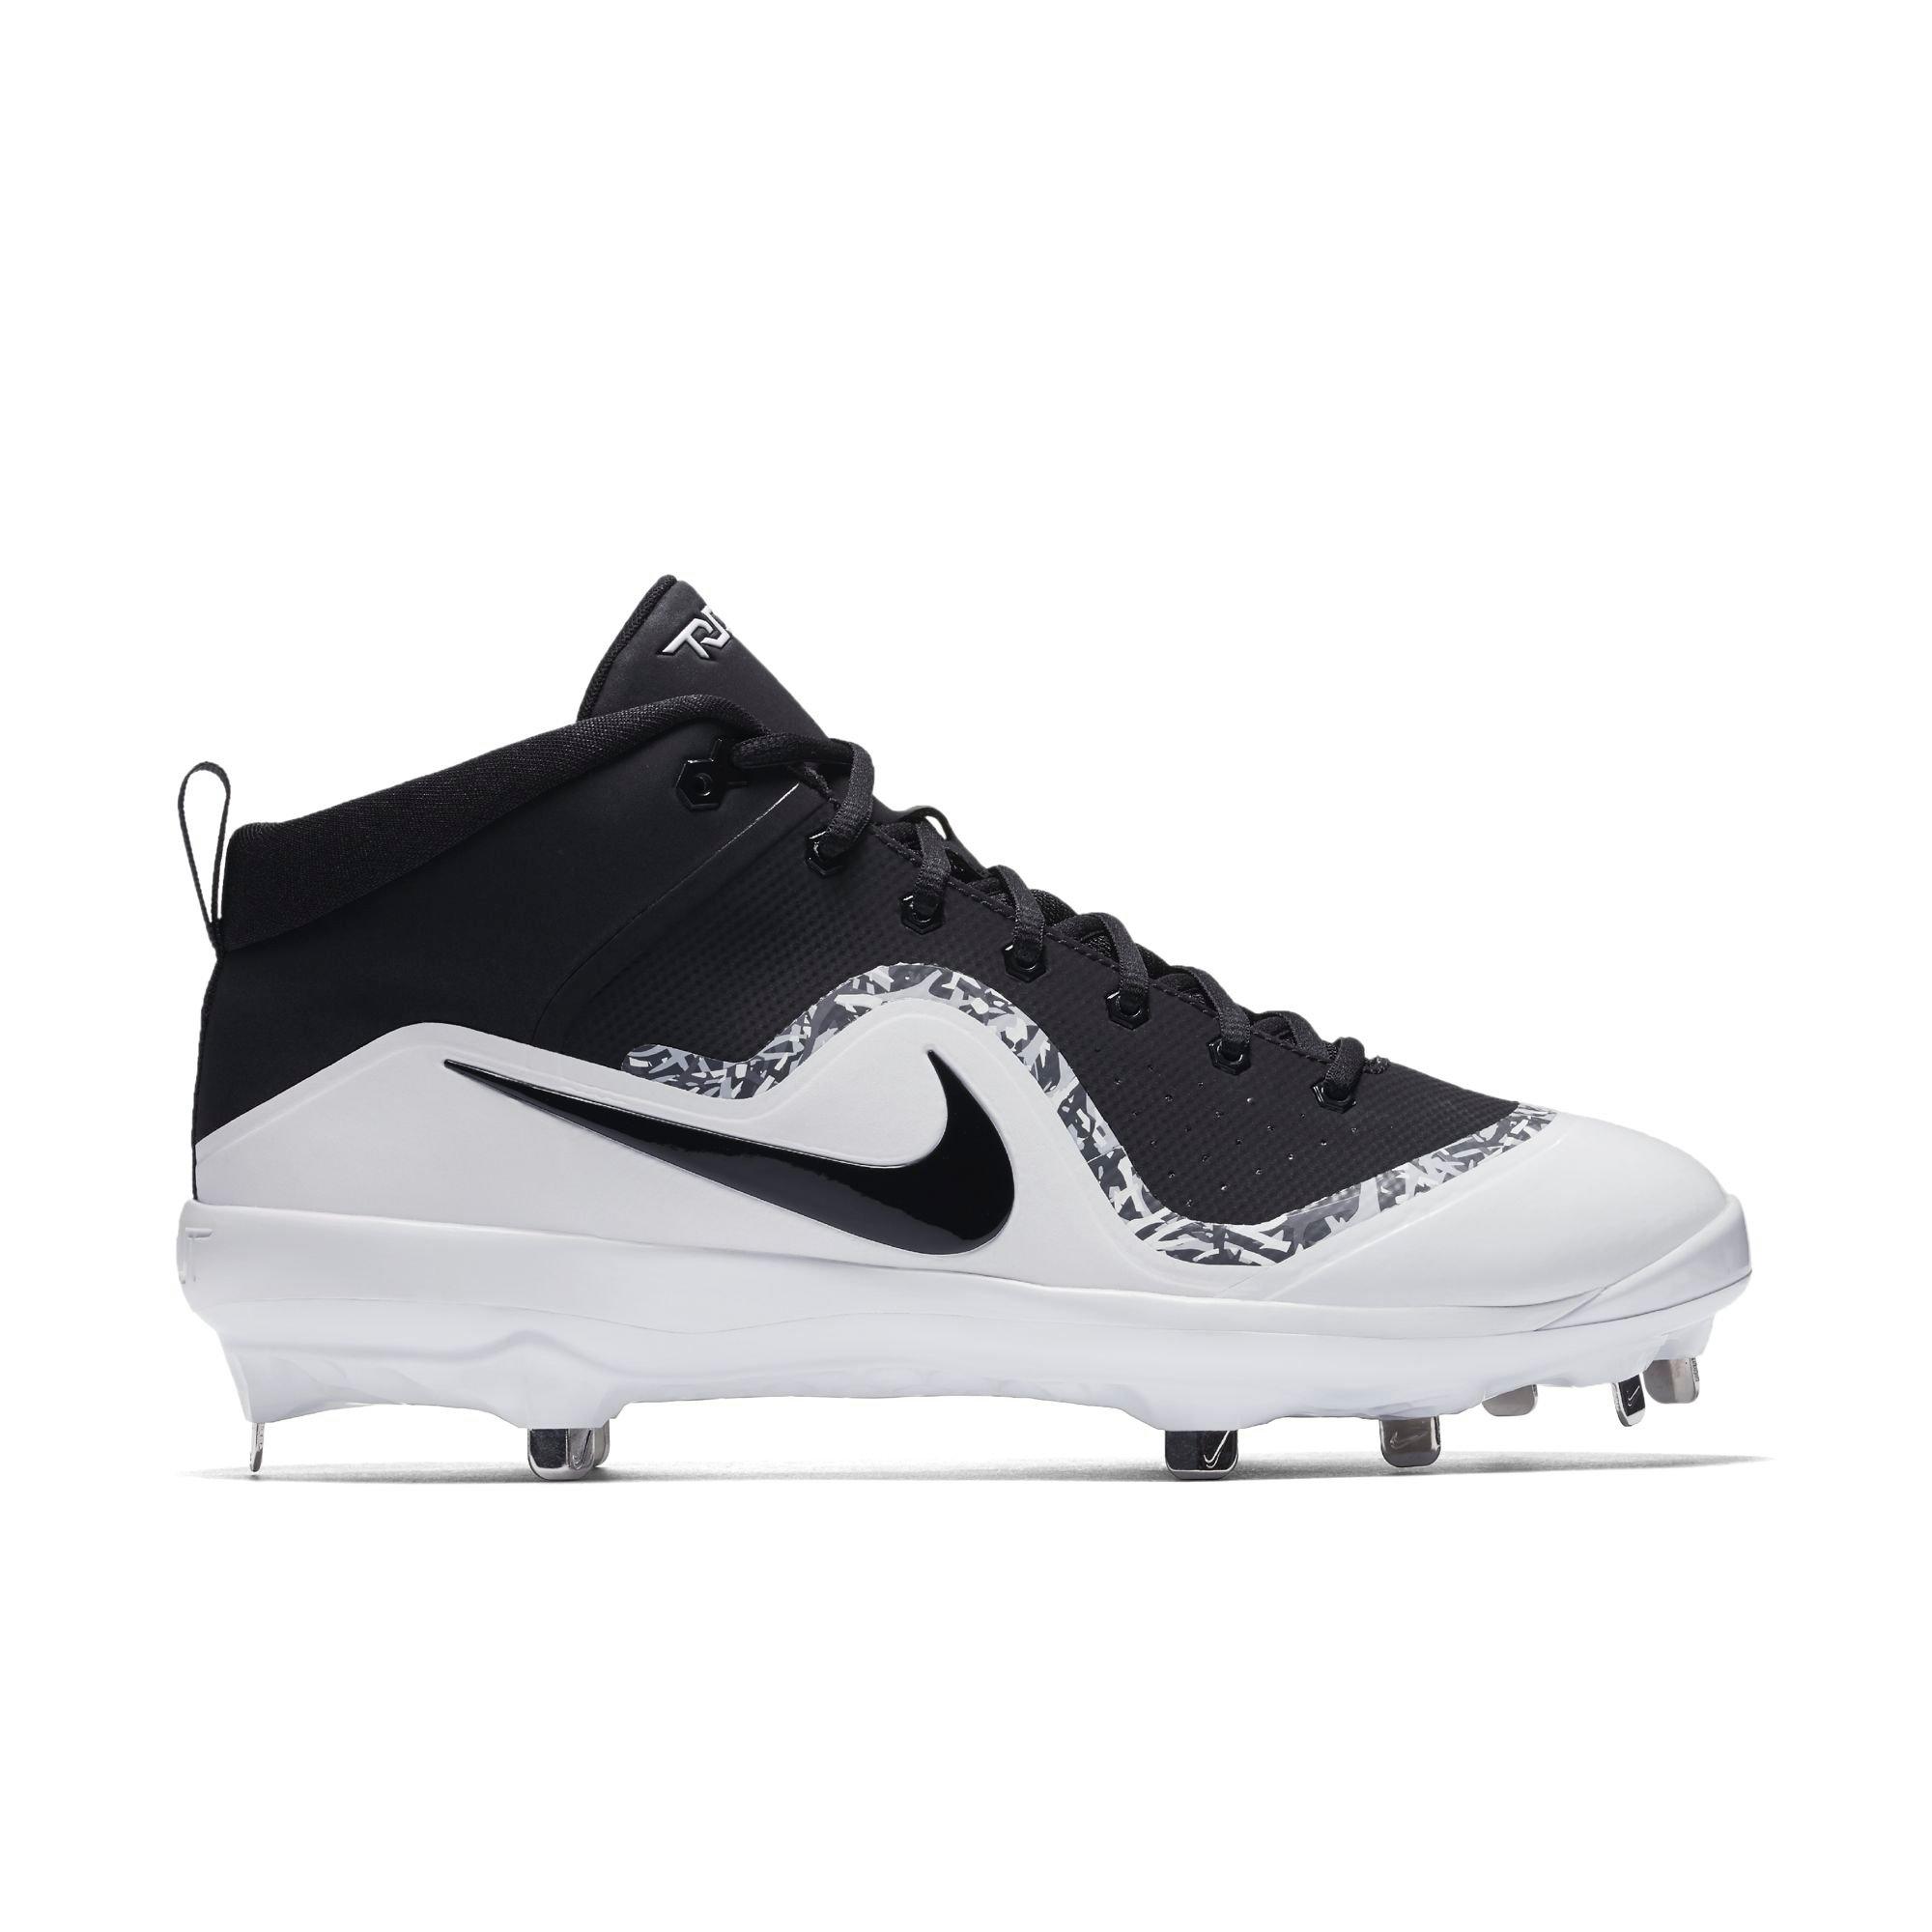 nike men's force air trout 4 pro baseball cleat